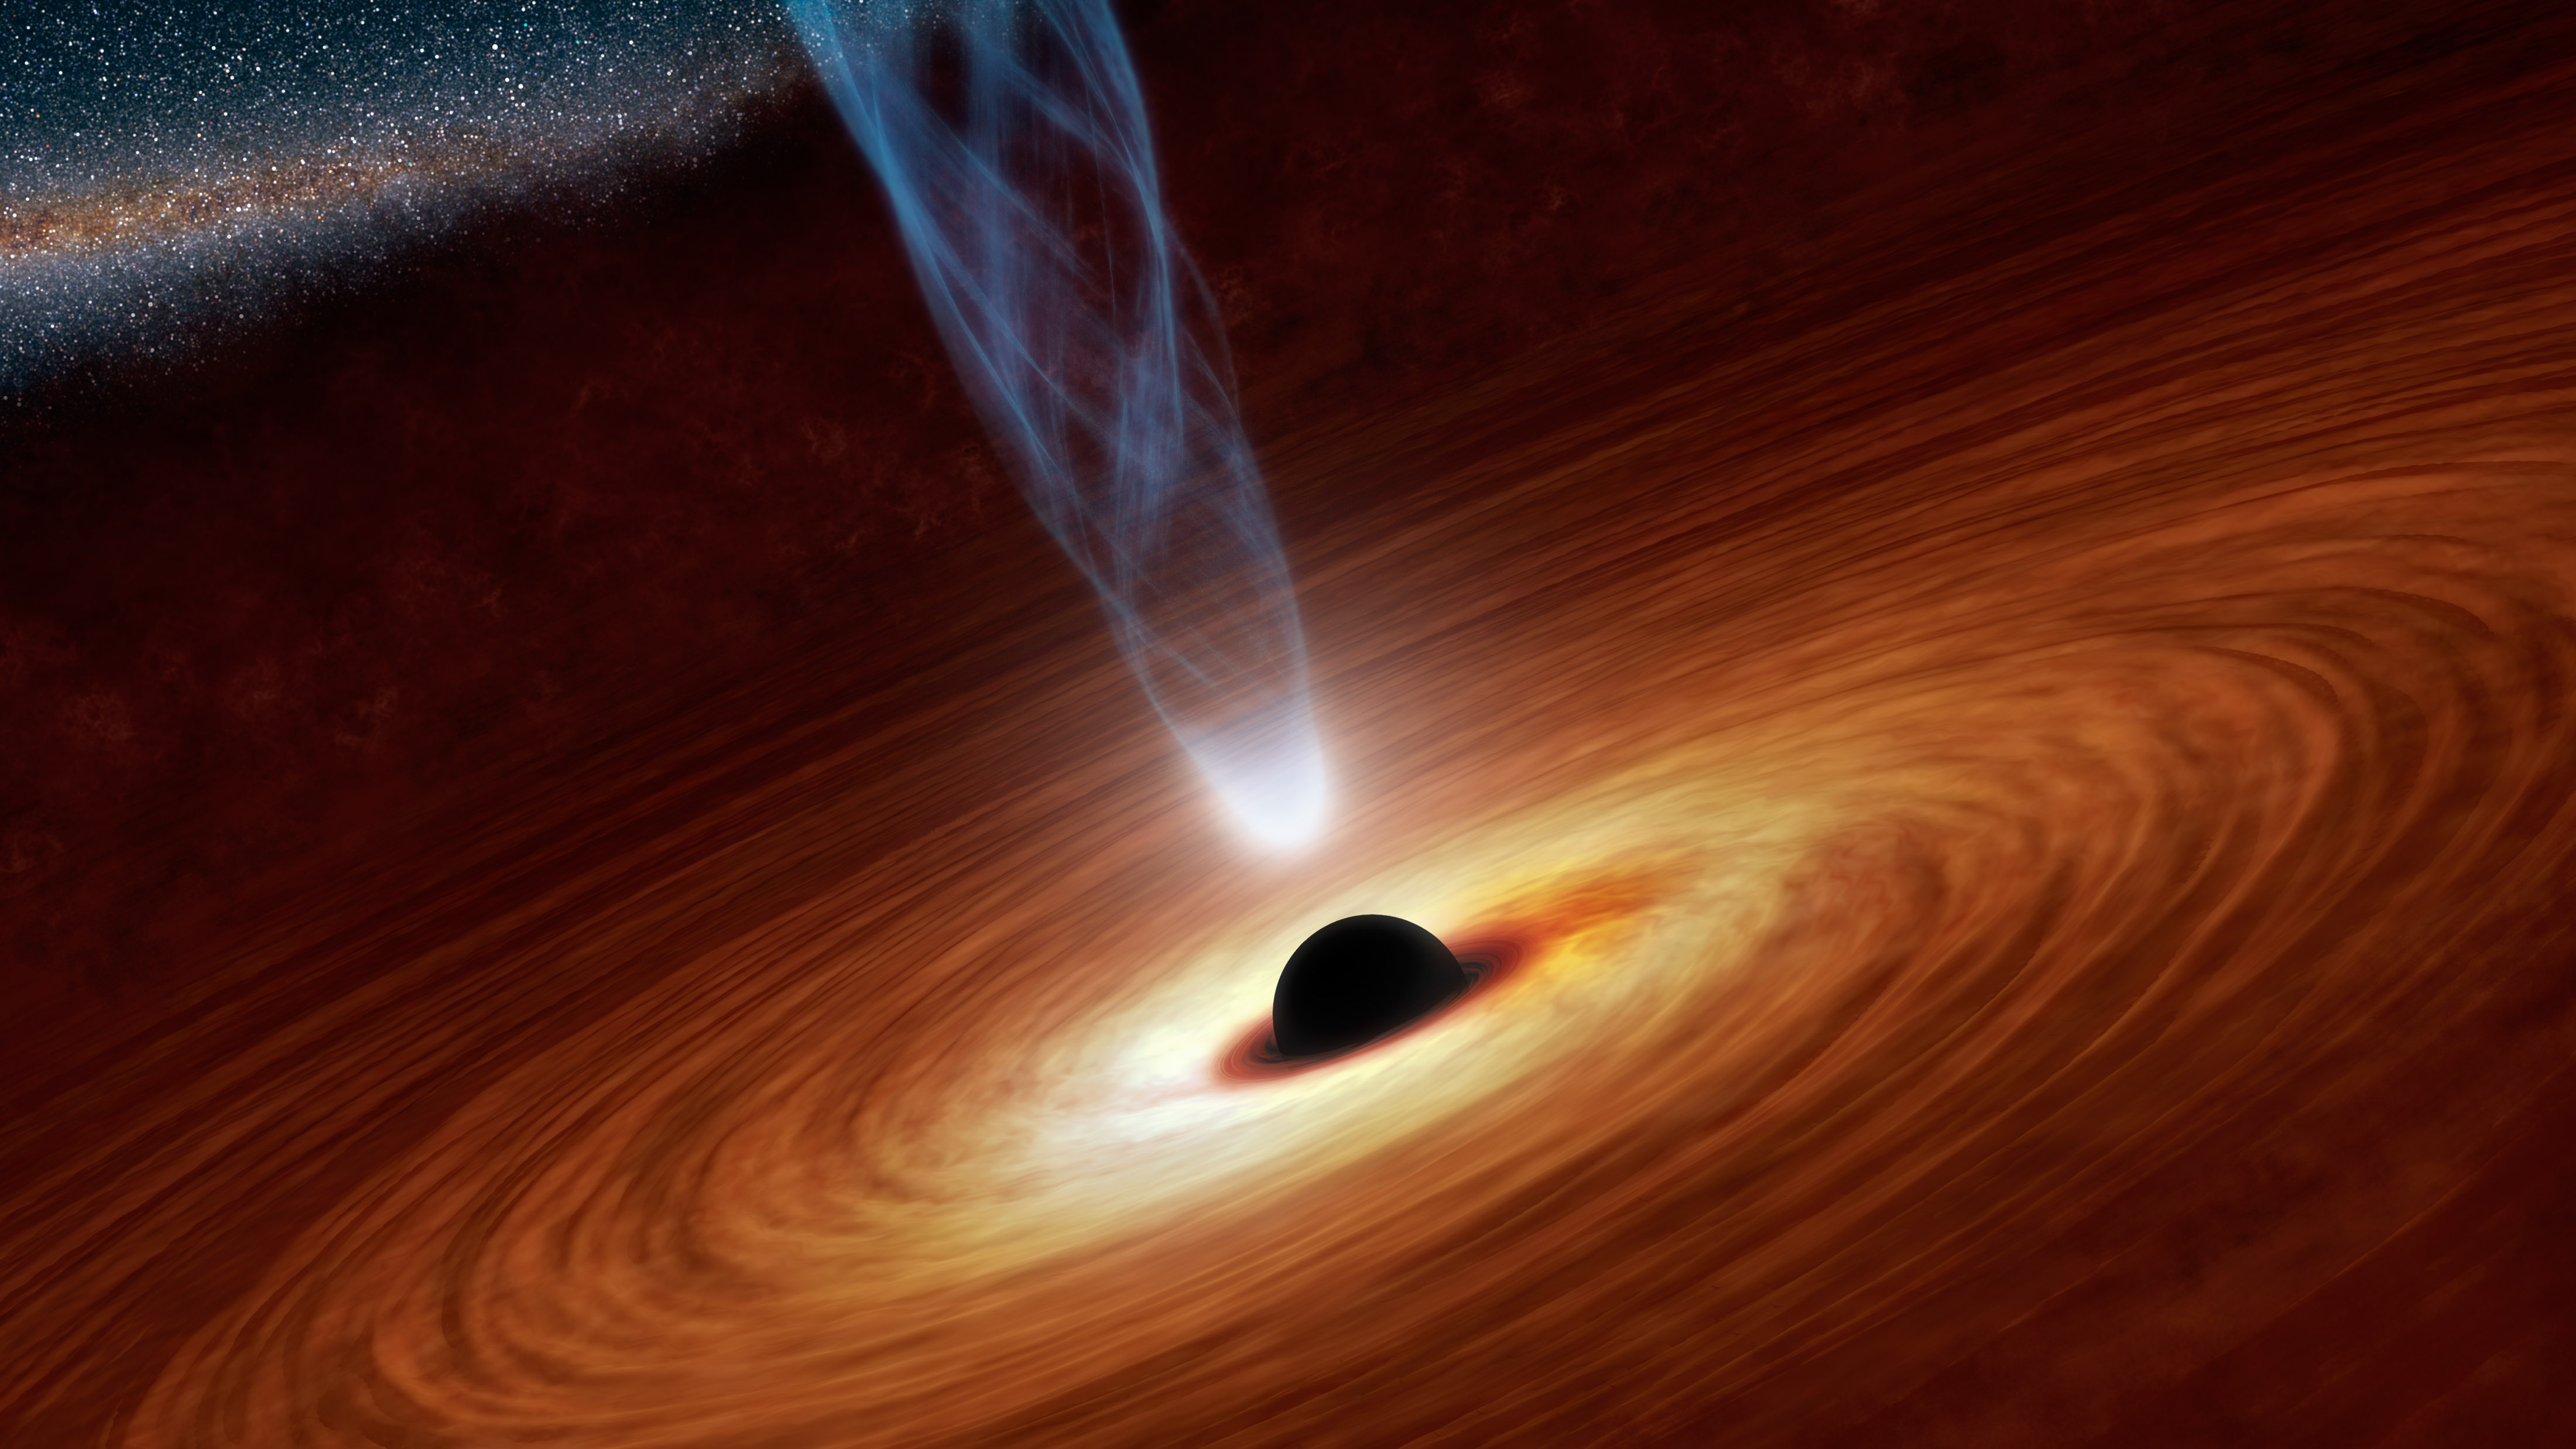 Scientist discovered giant black hole trio spiraling into each other